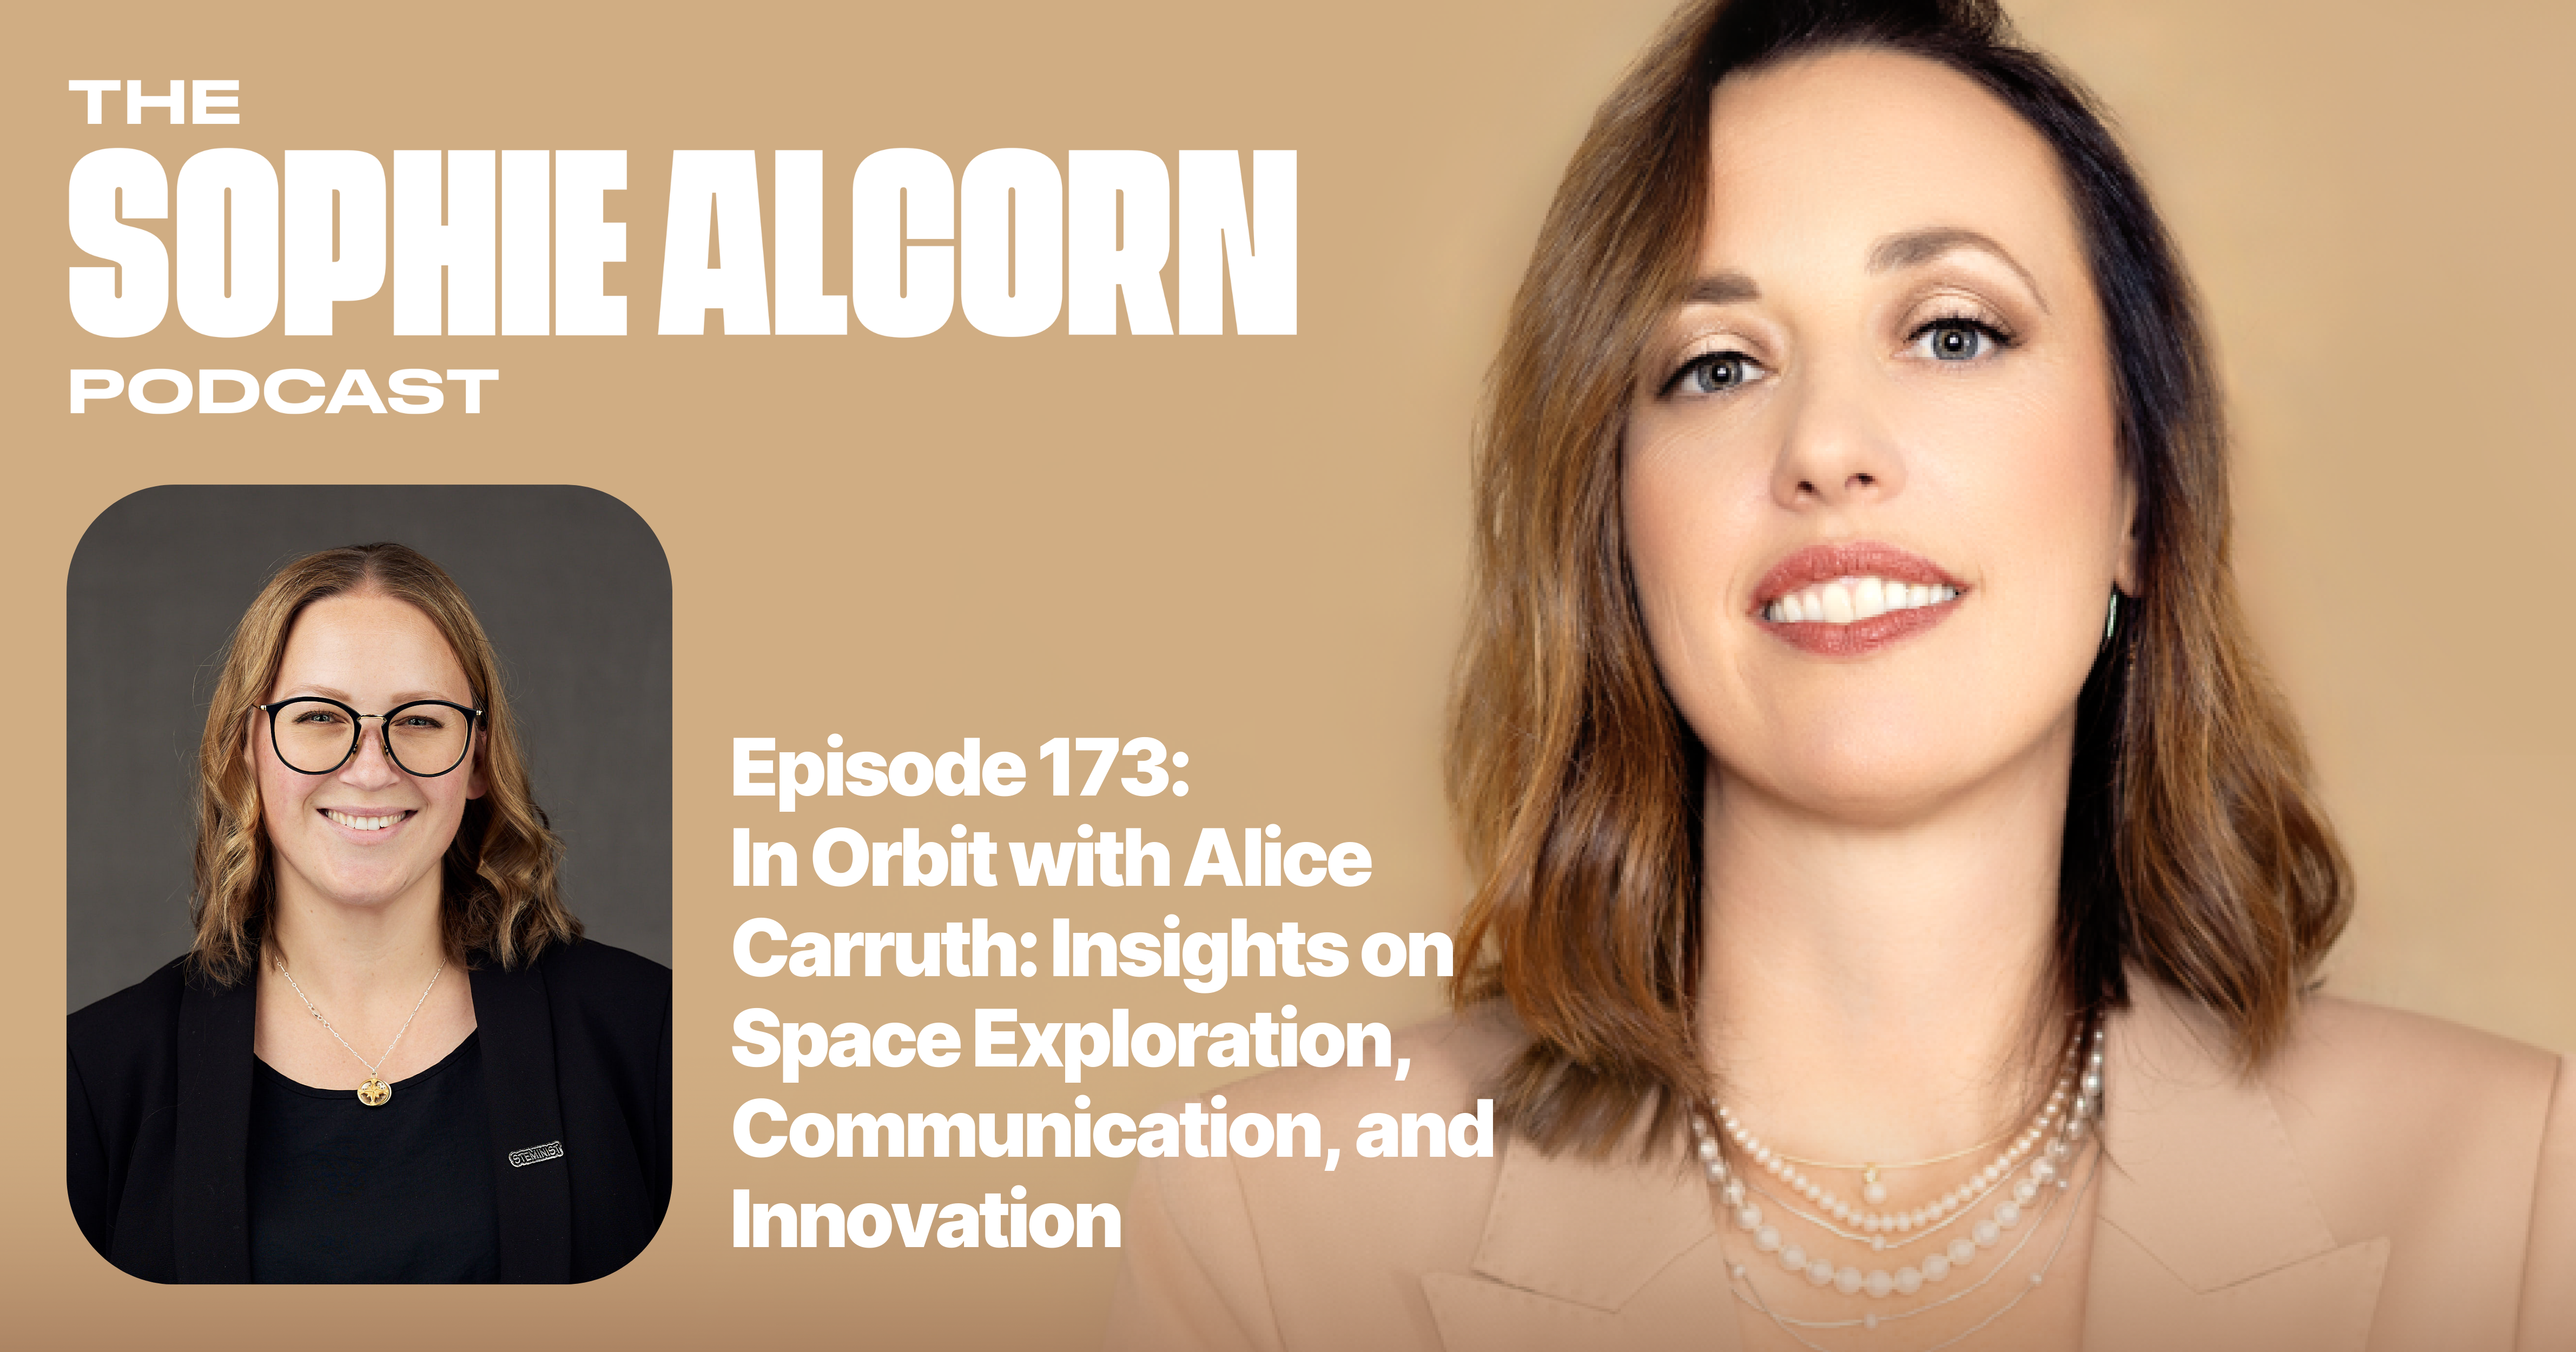 Sophie Alcorn and Alice Carruth discuss space.